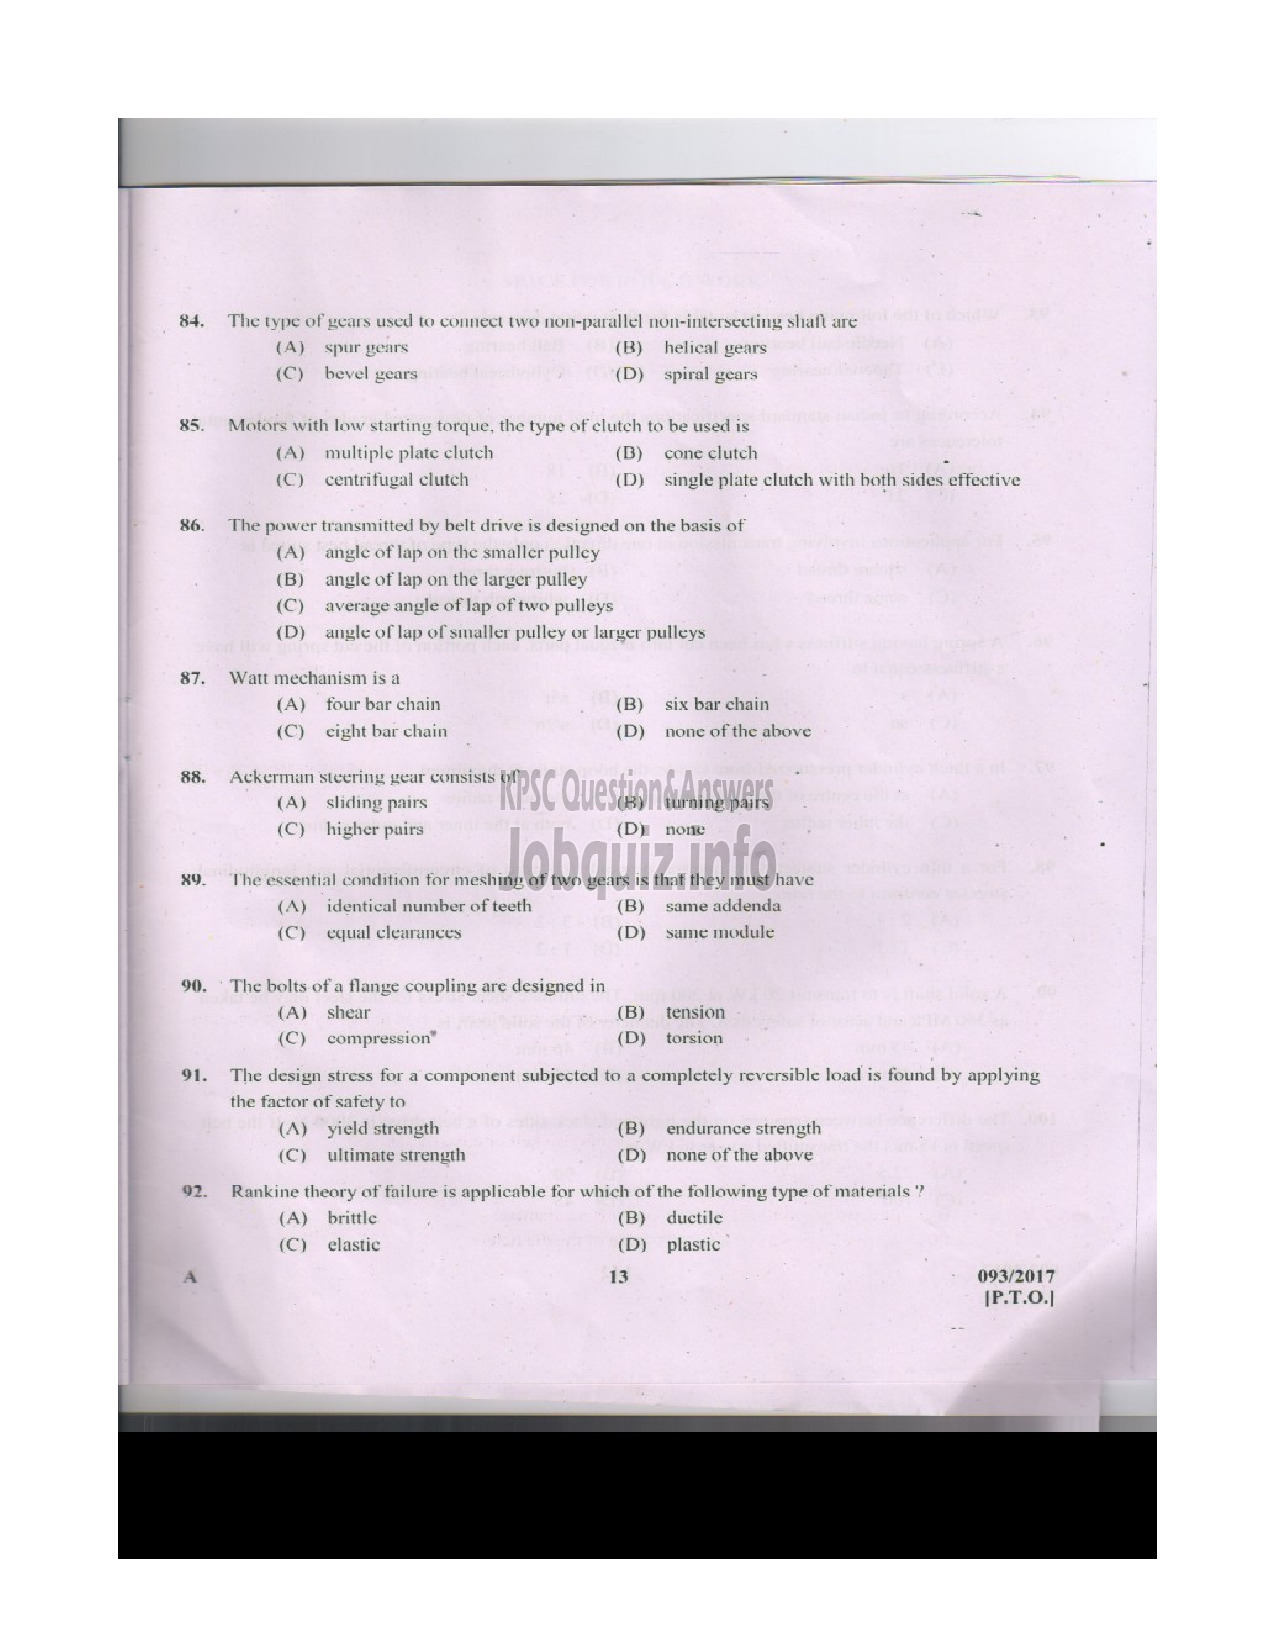 Kerala PSC Question Paper - INSTRUCTOR GRADE I MECHANICAL ENGINEERING ENGINEERING COLLEGES-12